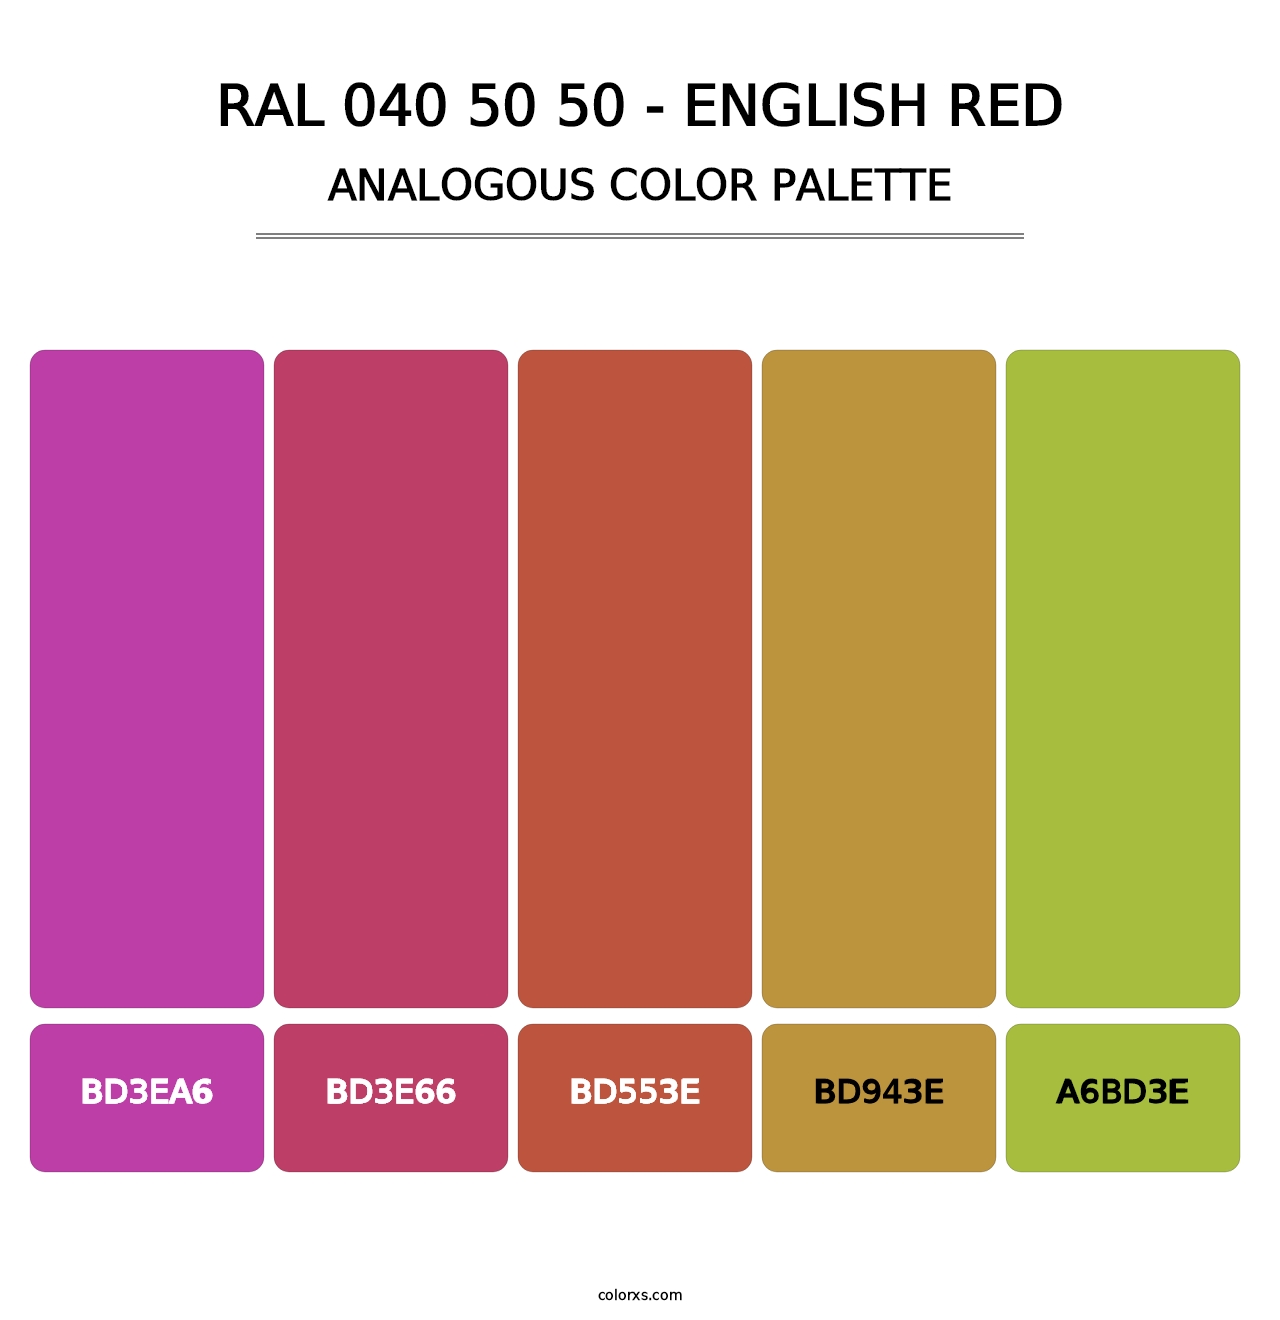 RAL 040 50 50 - English Red - Analogous Color Palette